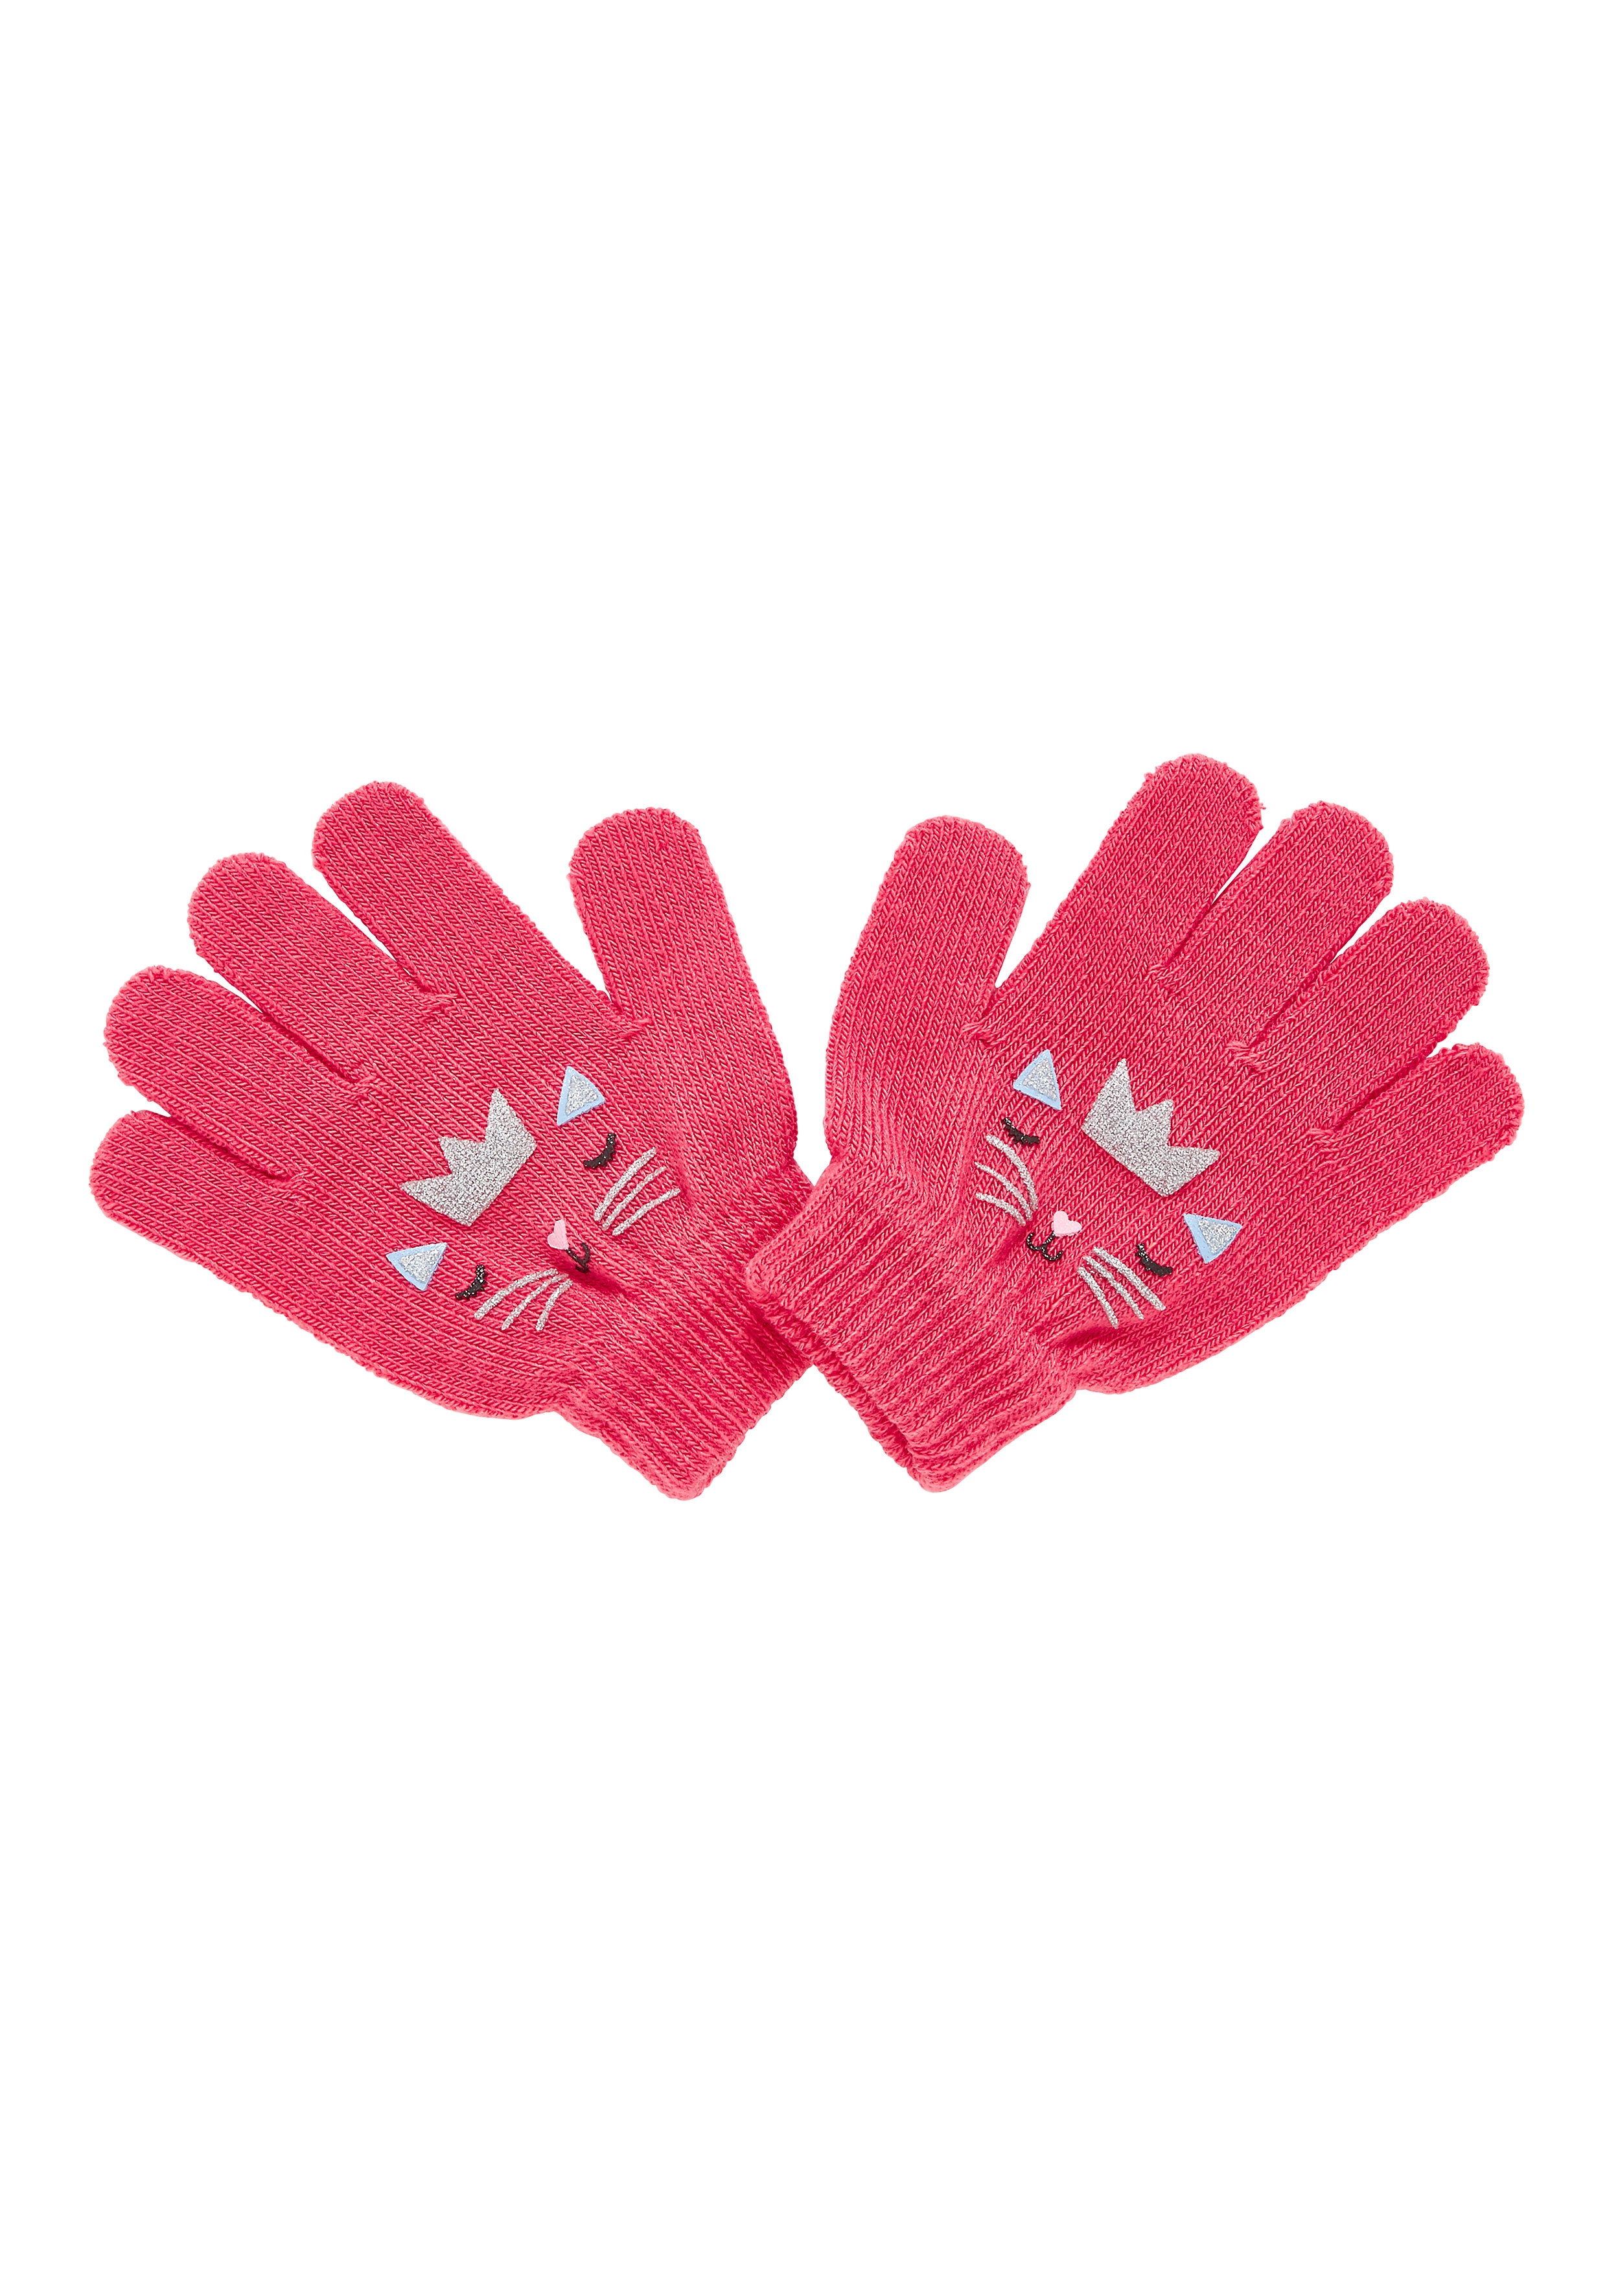 Mothercare | Girls Gloves Cat Print - Pink